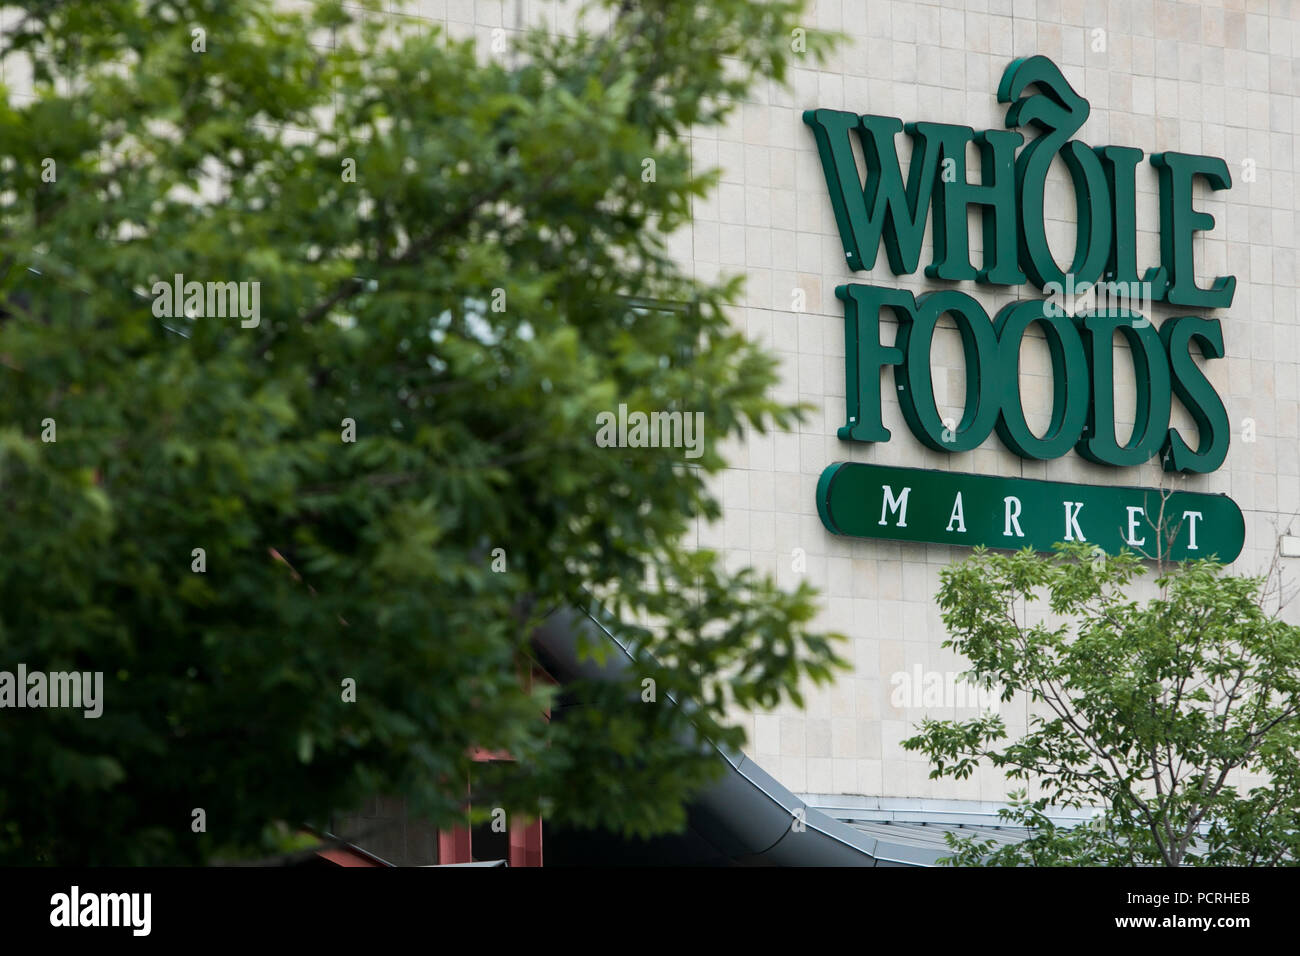 https://c8.alamy.com/comp/PCRHEB/a-logo-sign-outside-of-a-whole-foods-market-grocery-store-location-in-denver-colorado-on-july-23-2018-PCRHEB.jpg